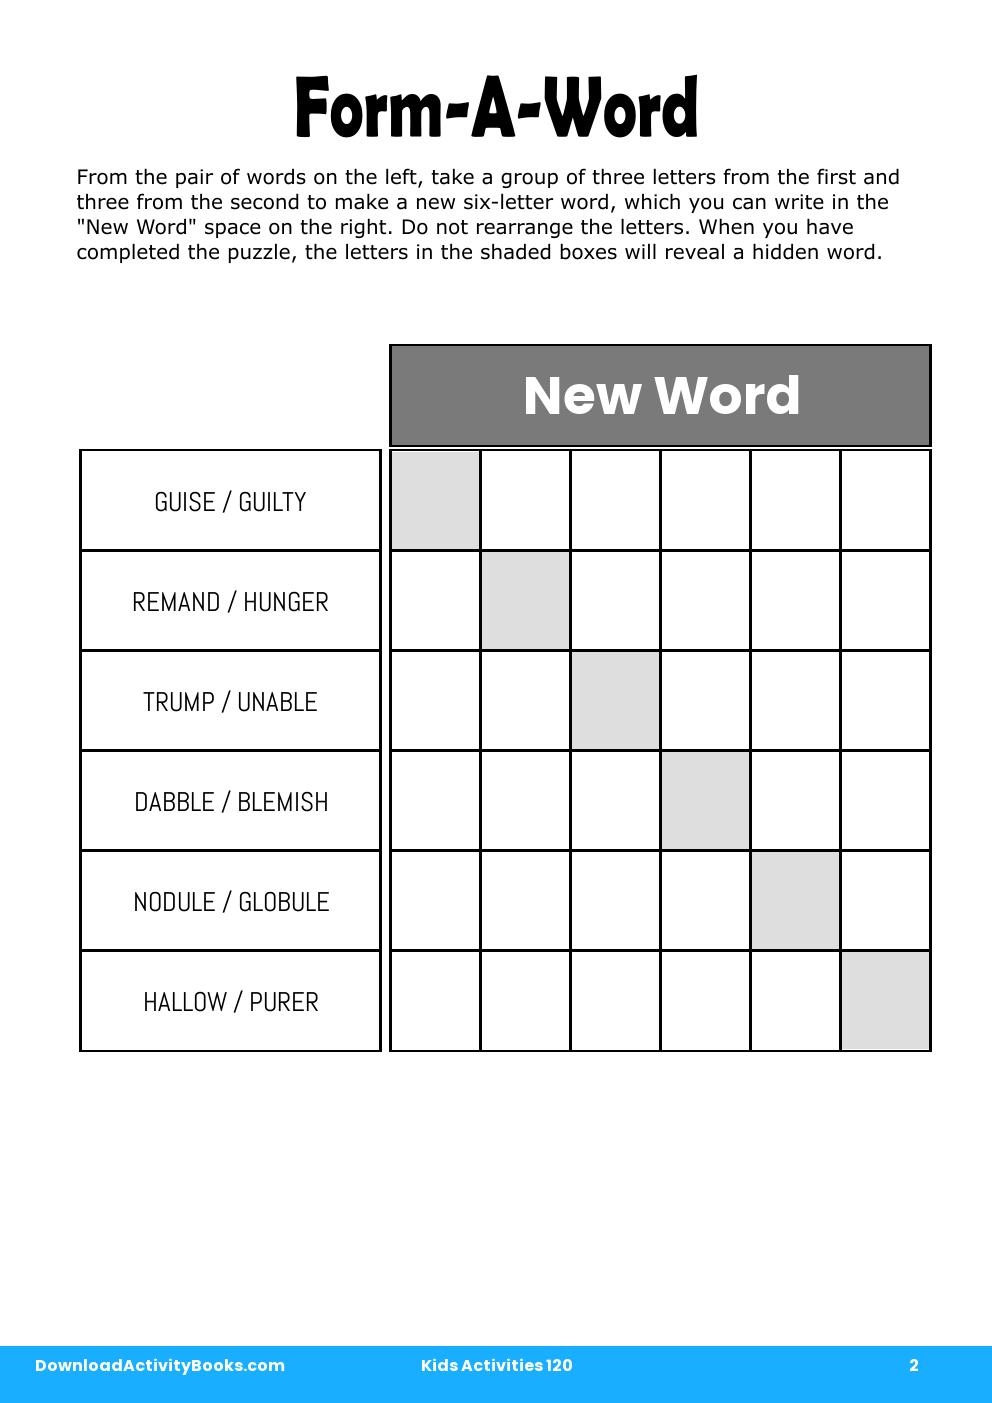 Form-A-Word in Kids Activities 120